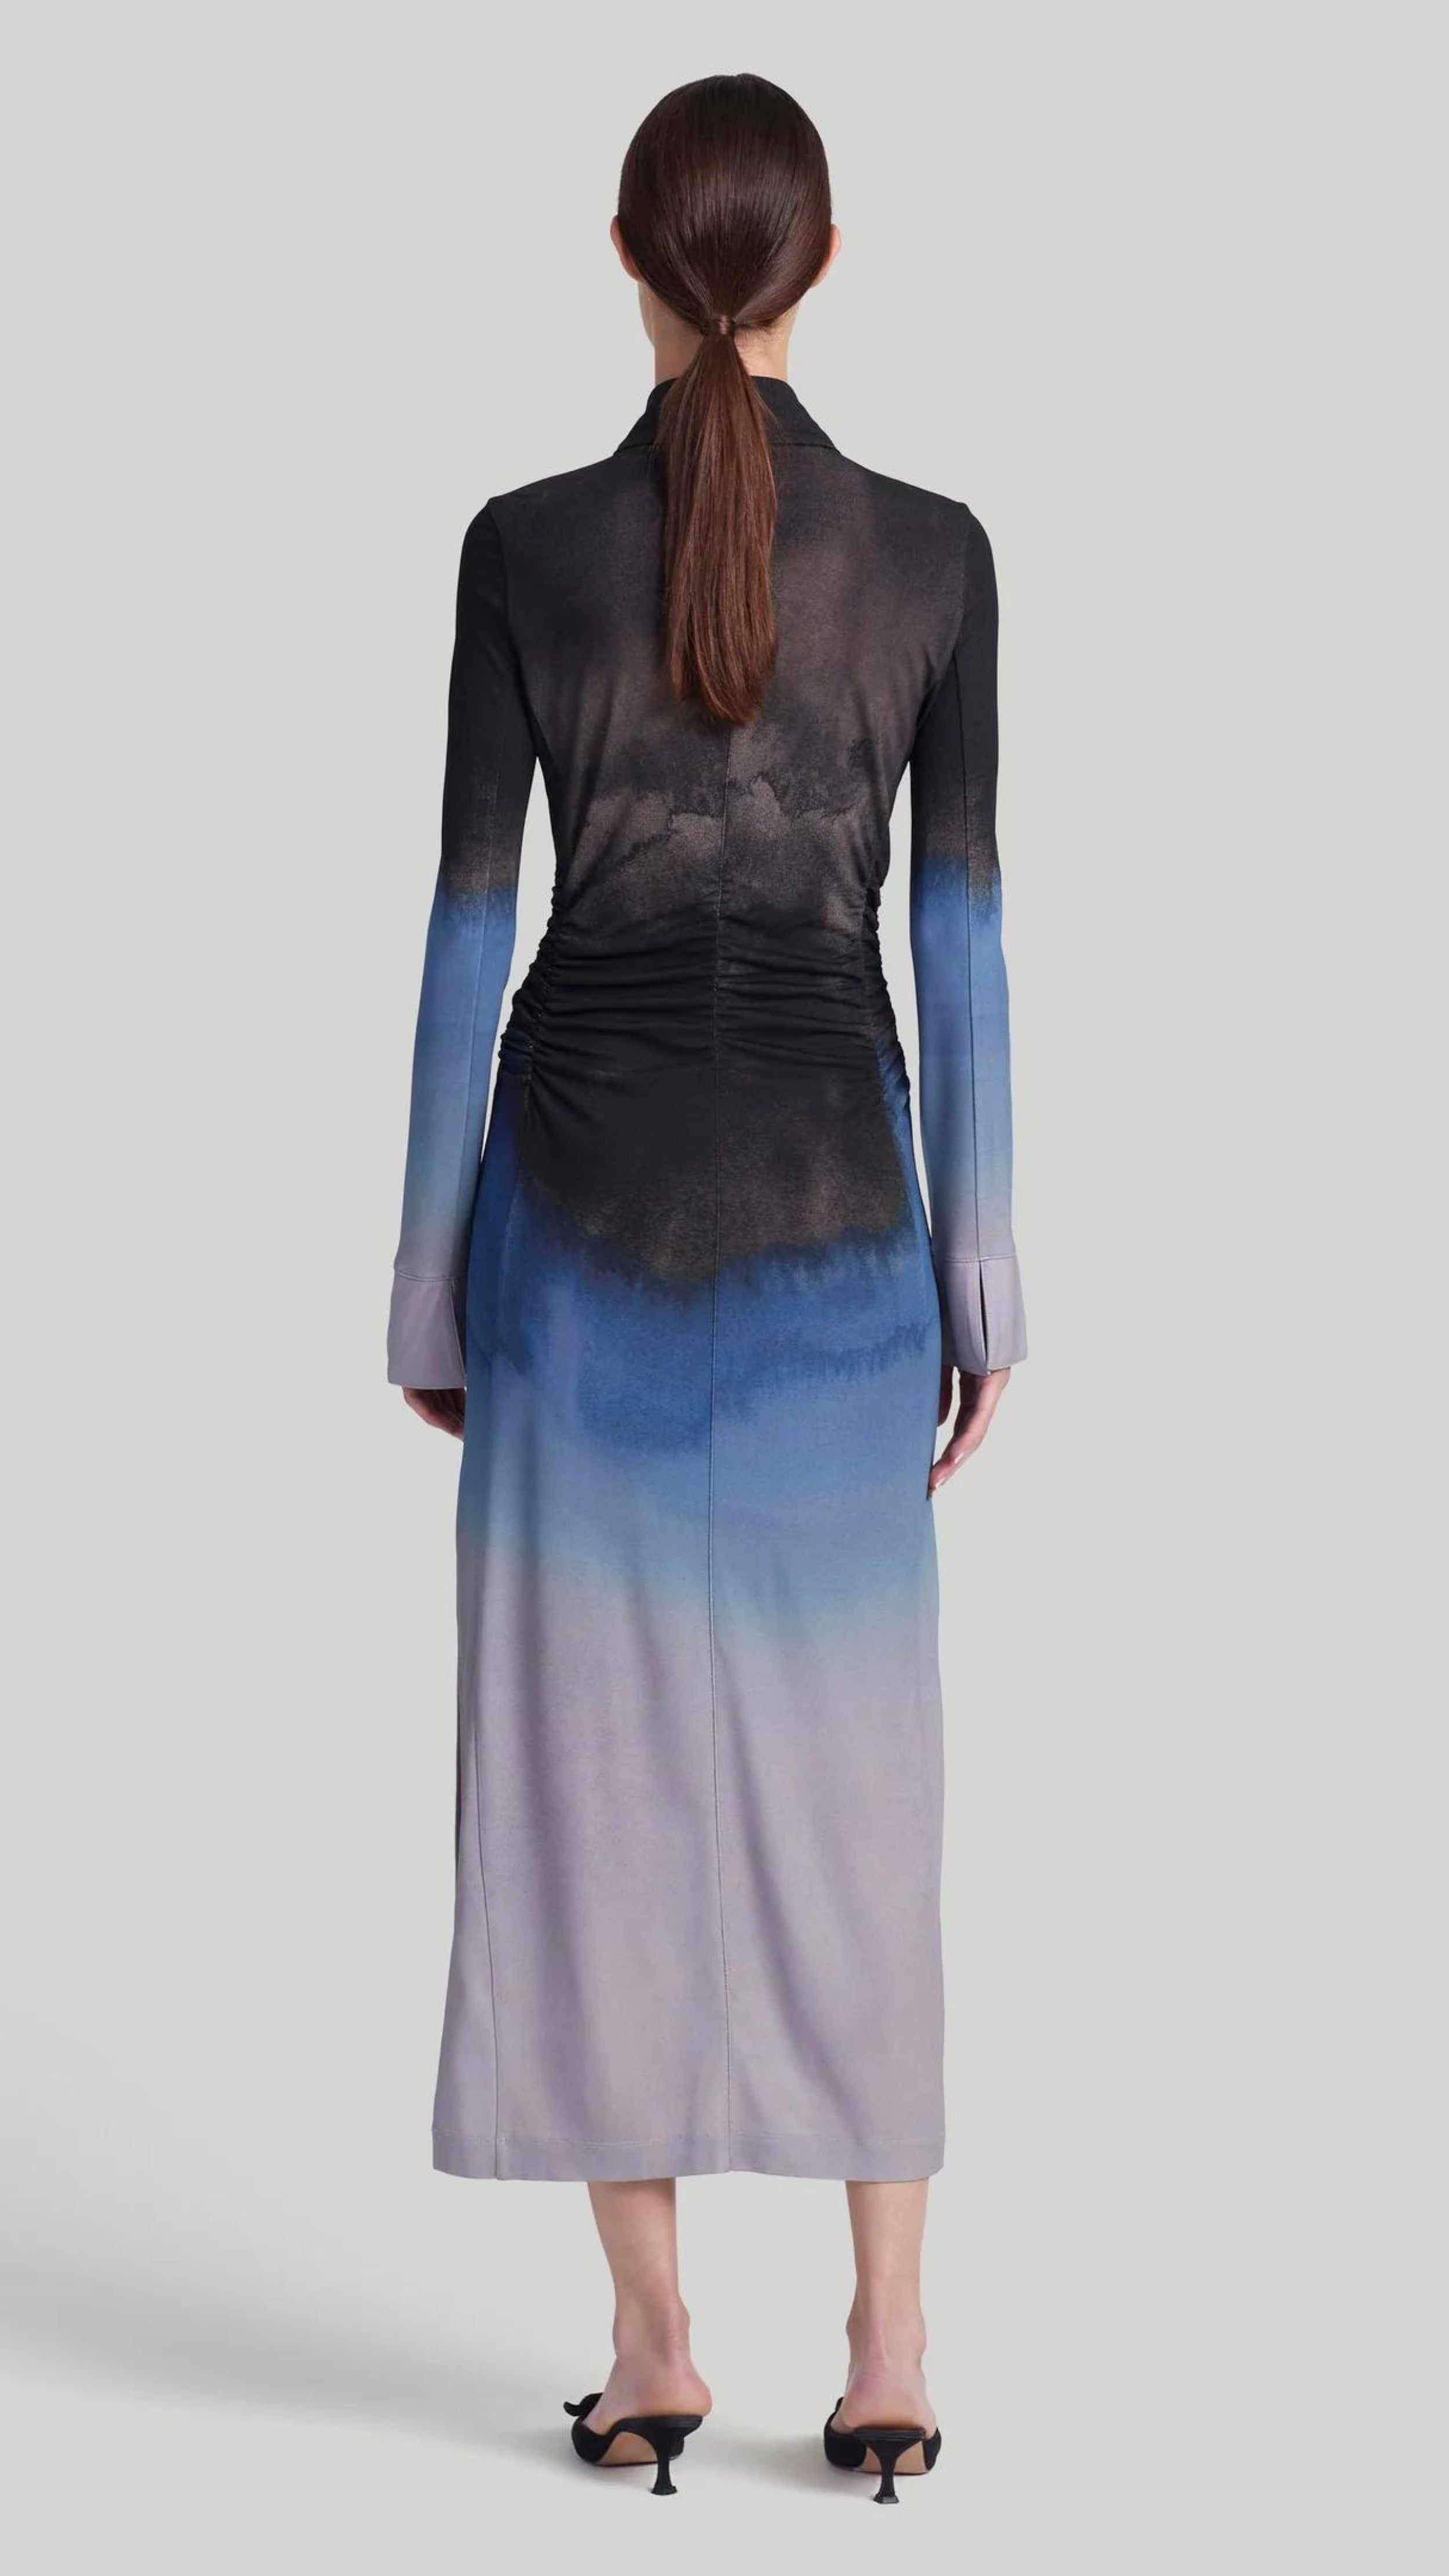 Altuzarra Claudia Dress in Eventide Made from jersey fabric, it is a slim-fitting midi dress featuring ruched detail at the waist, shirt dress buttons up the front, and side slits at the hem. The color is an ombre of deep grey, blue, and pale grey. Shown on model facing back.